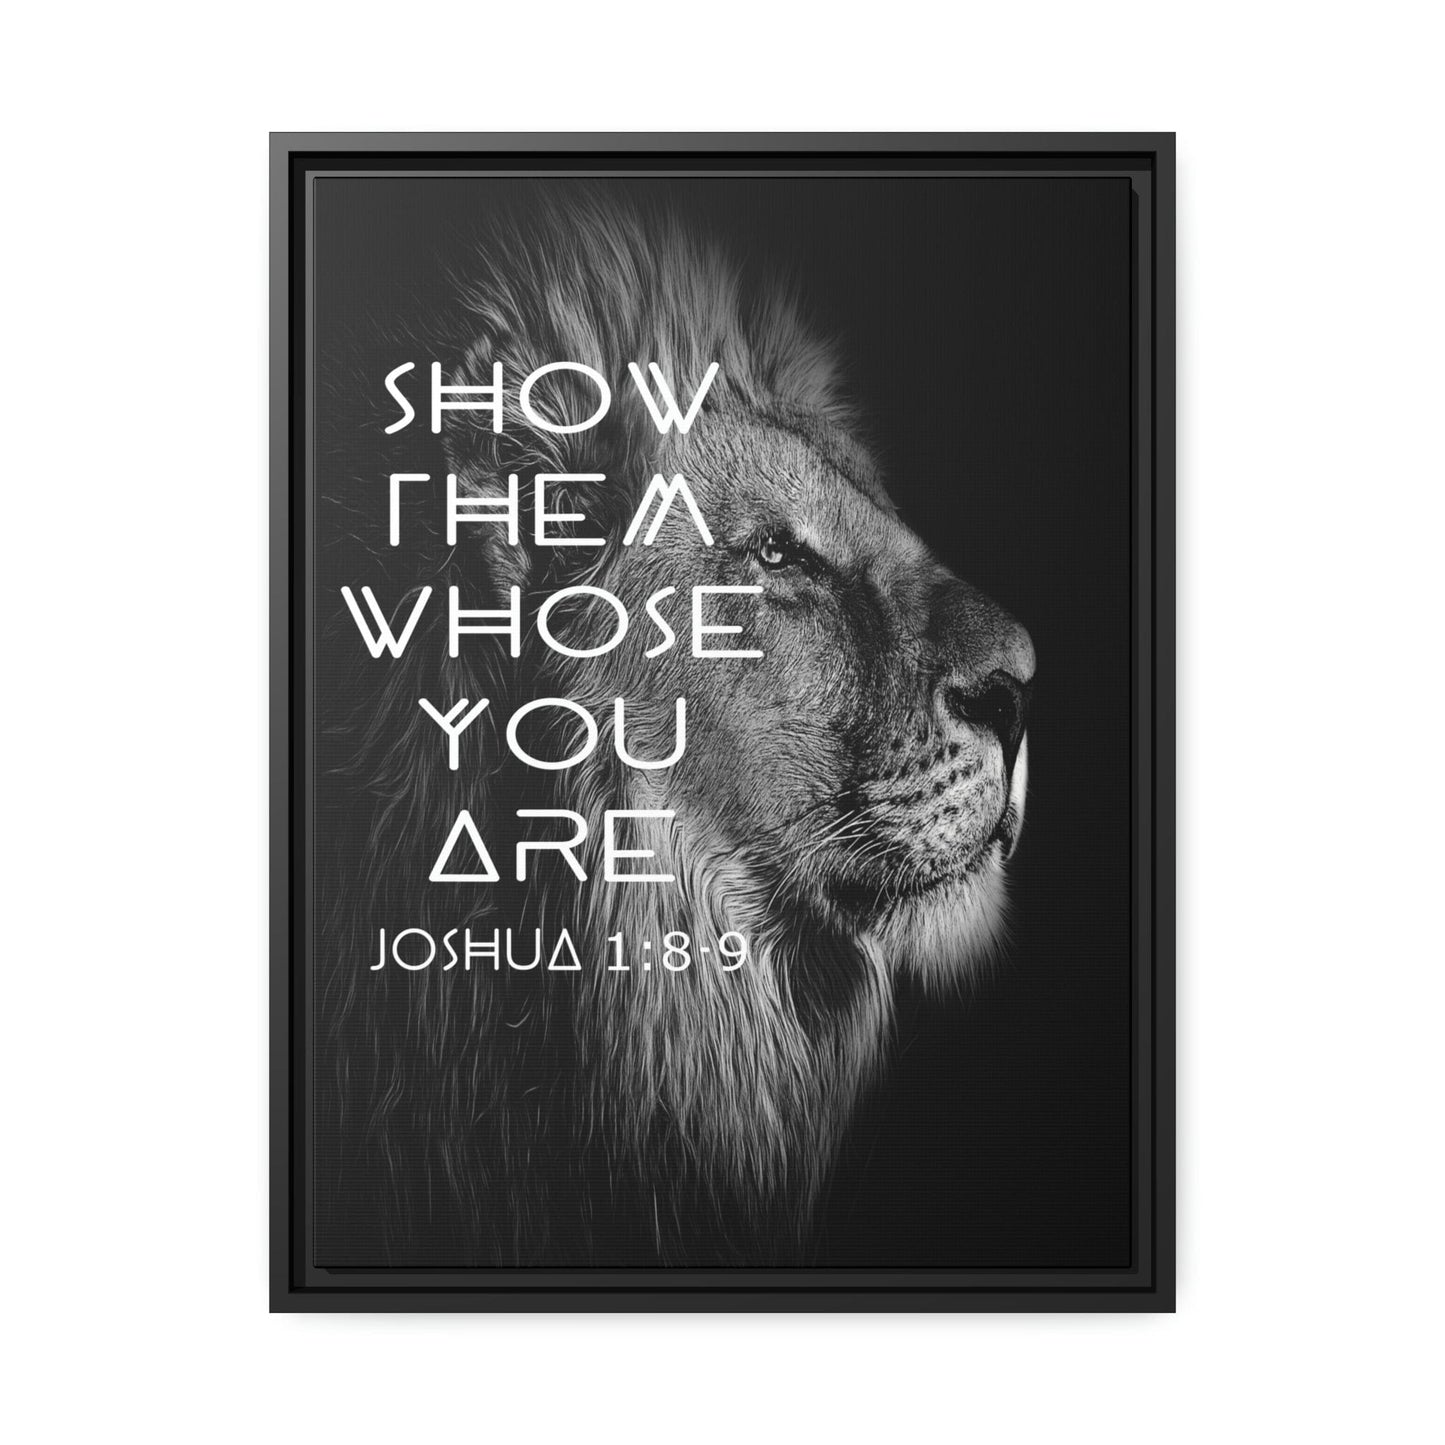 Printify Canvas 18″ x 24″ (Vertical) / Black / 1.25" Show Them Whose You Are - Joshua 1:8-9 Christian Canvas Wall Art